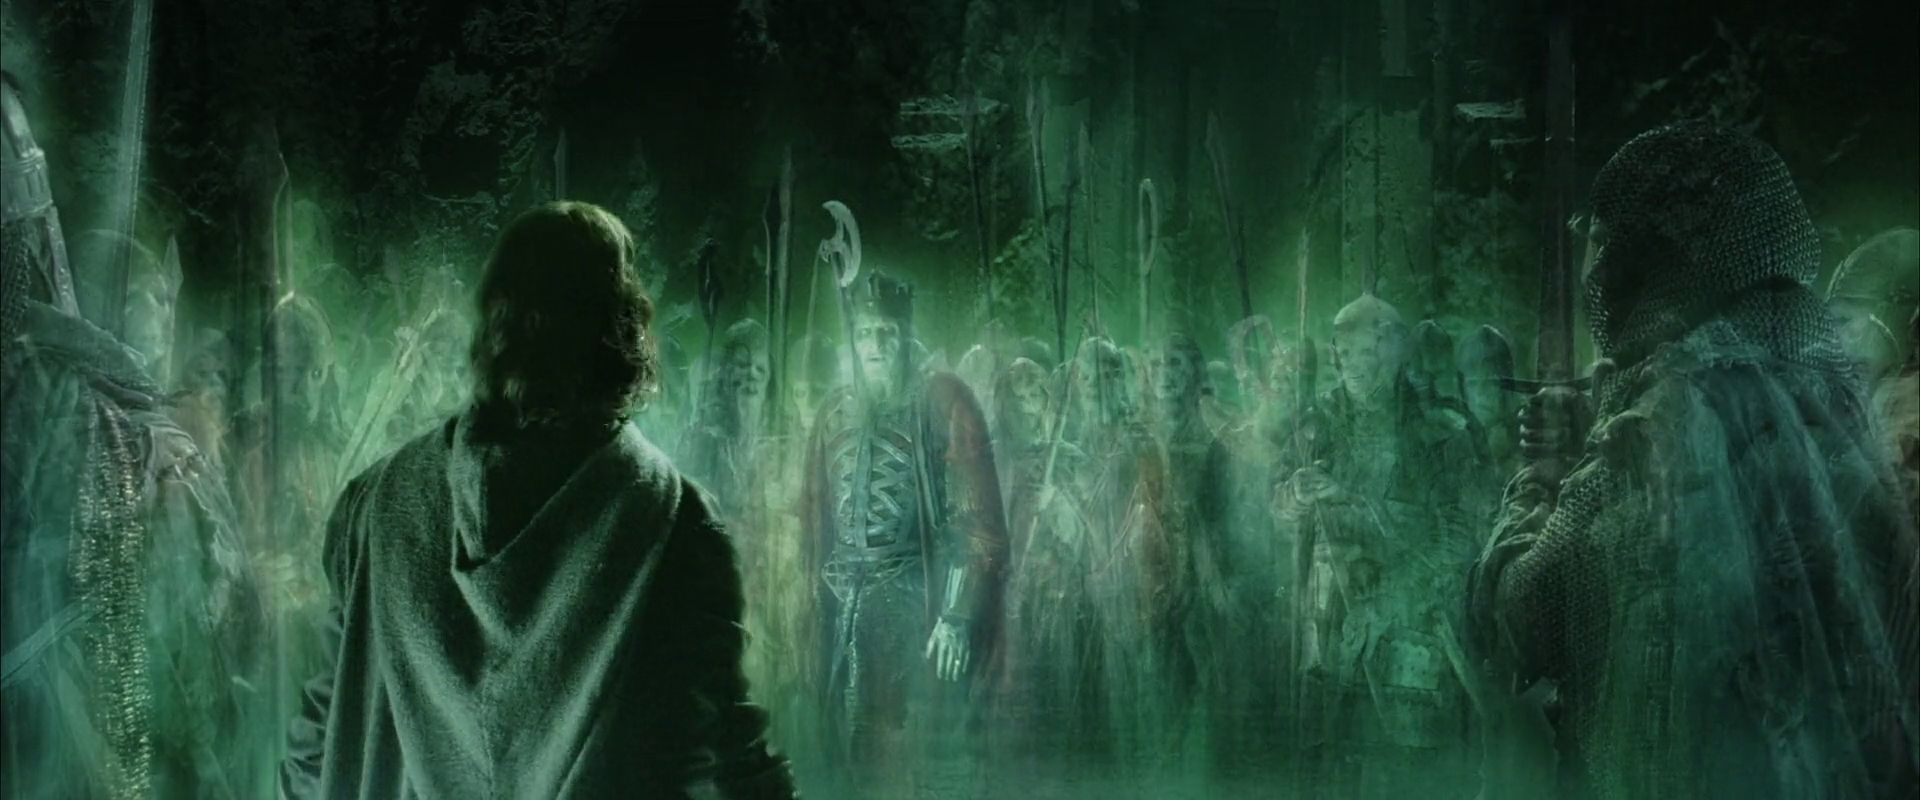 LOTR The Most Powerful Creatures Ranked NEXT Lord Of The Rings Every Supernatural Being Ranked From Weakest To Strongest